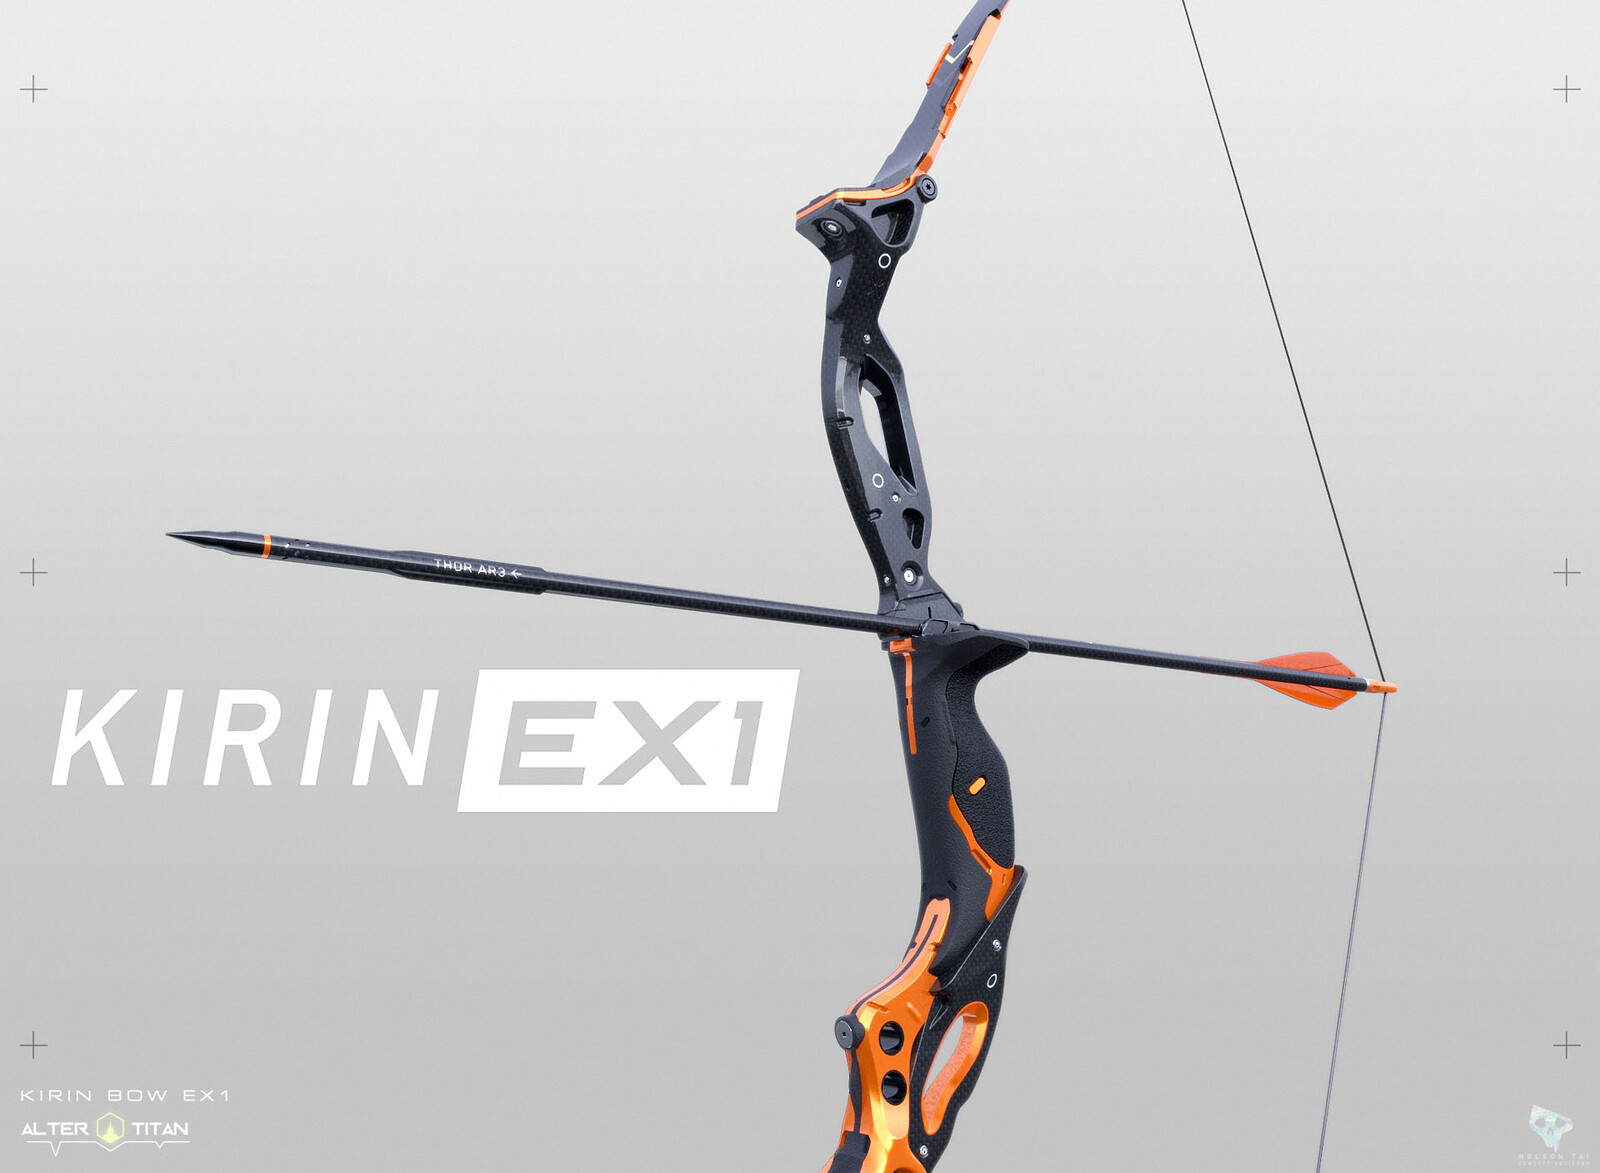 The KIRIN EX1 bow for your hunting adventures.